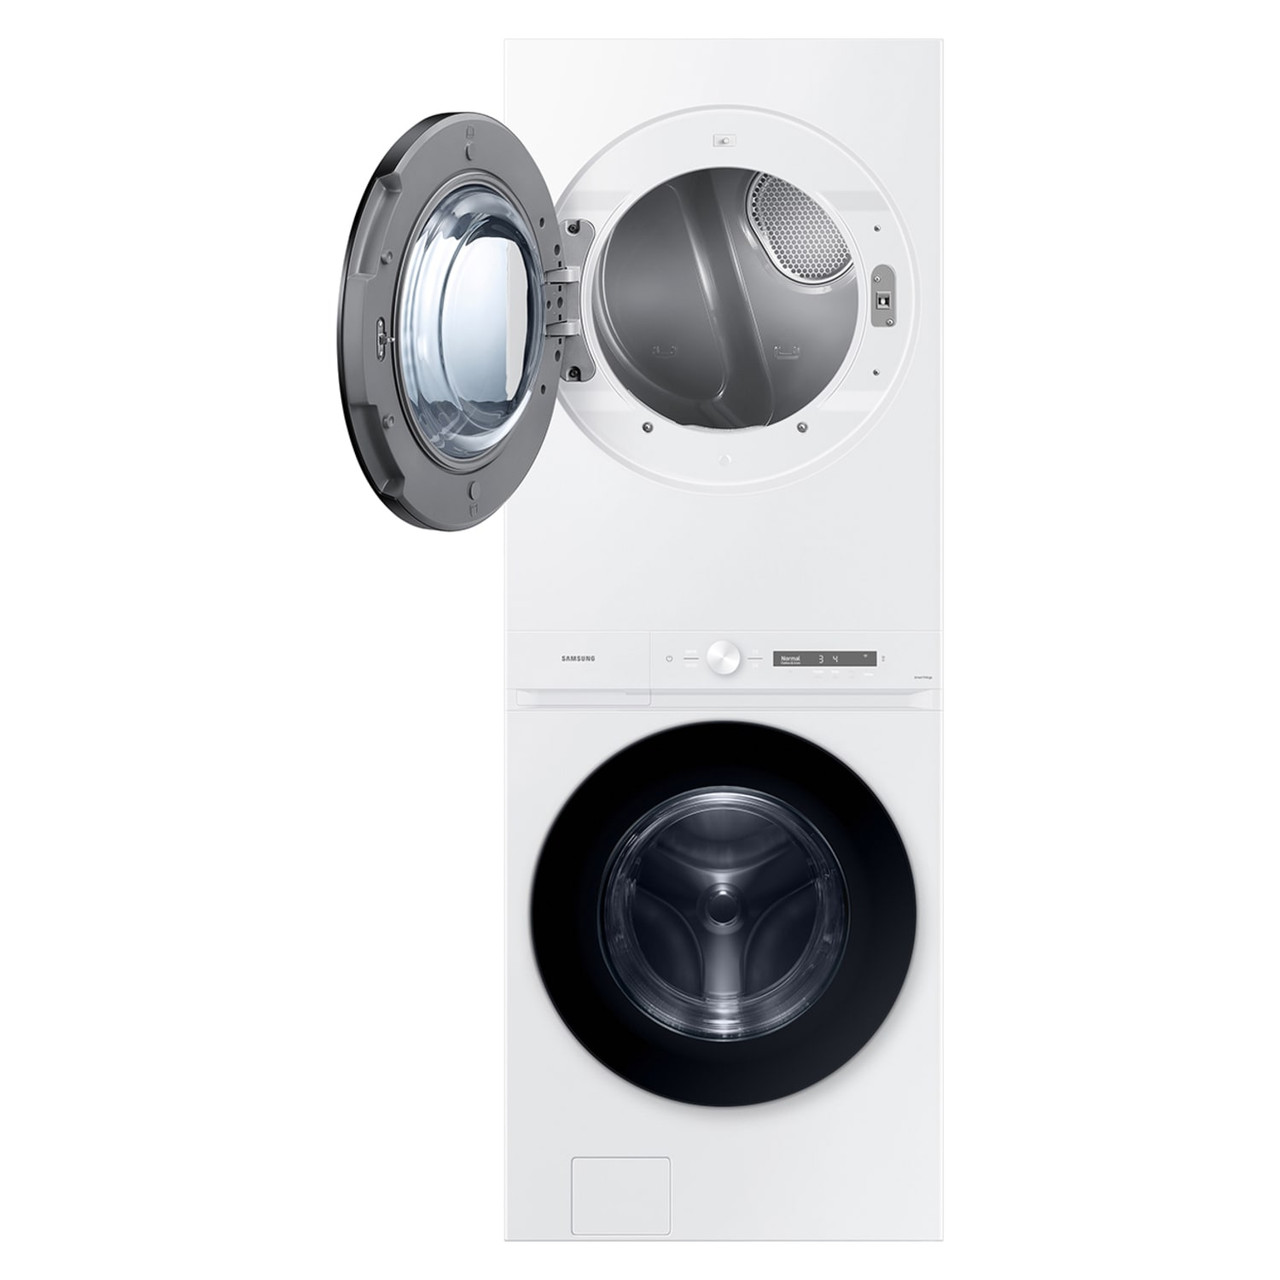 Samsung Bespoke AI Laundry Hub™ 4.6 cu. ft. Large Capacity Single Unit Washer with Steam Wash and 7.6 cu. ft. Electric Dryer in White - WH46DBH100EW